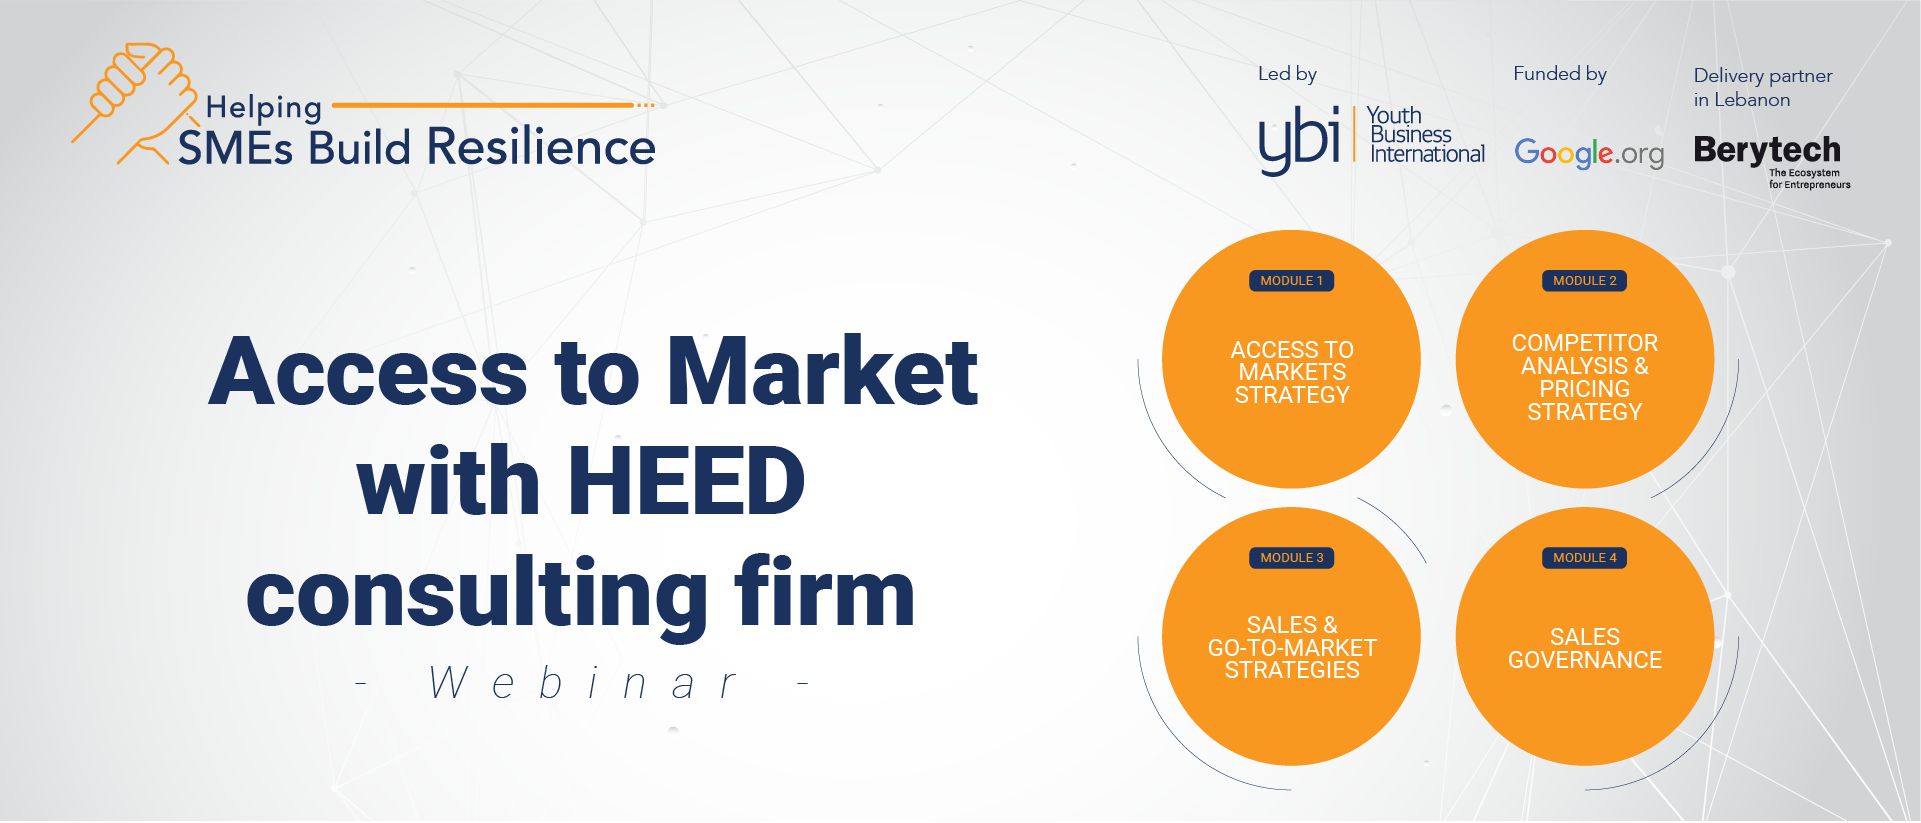 Access to Market with HEED consulting firm-1920x822